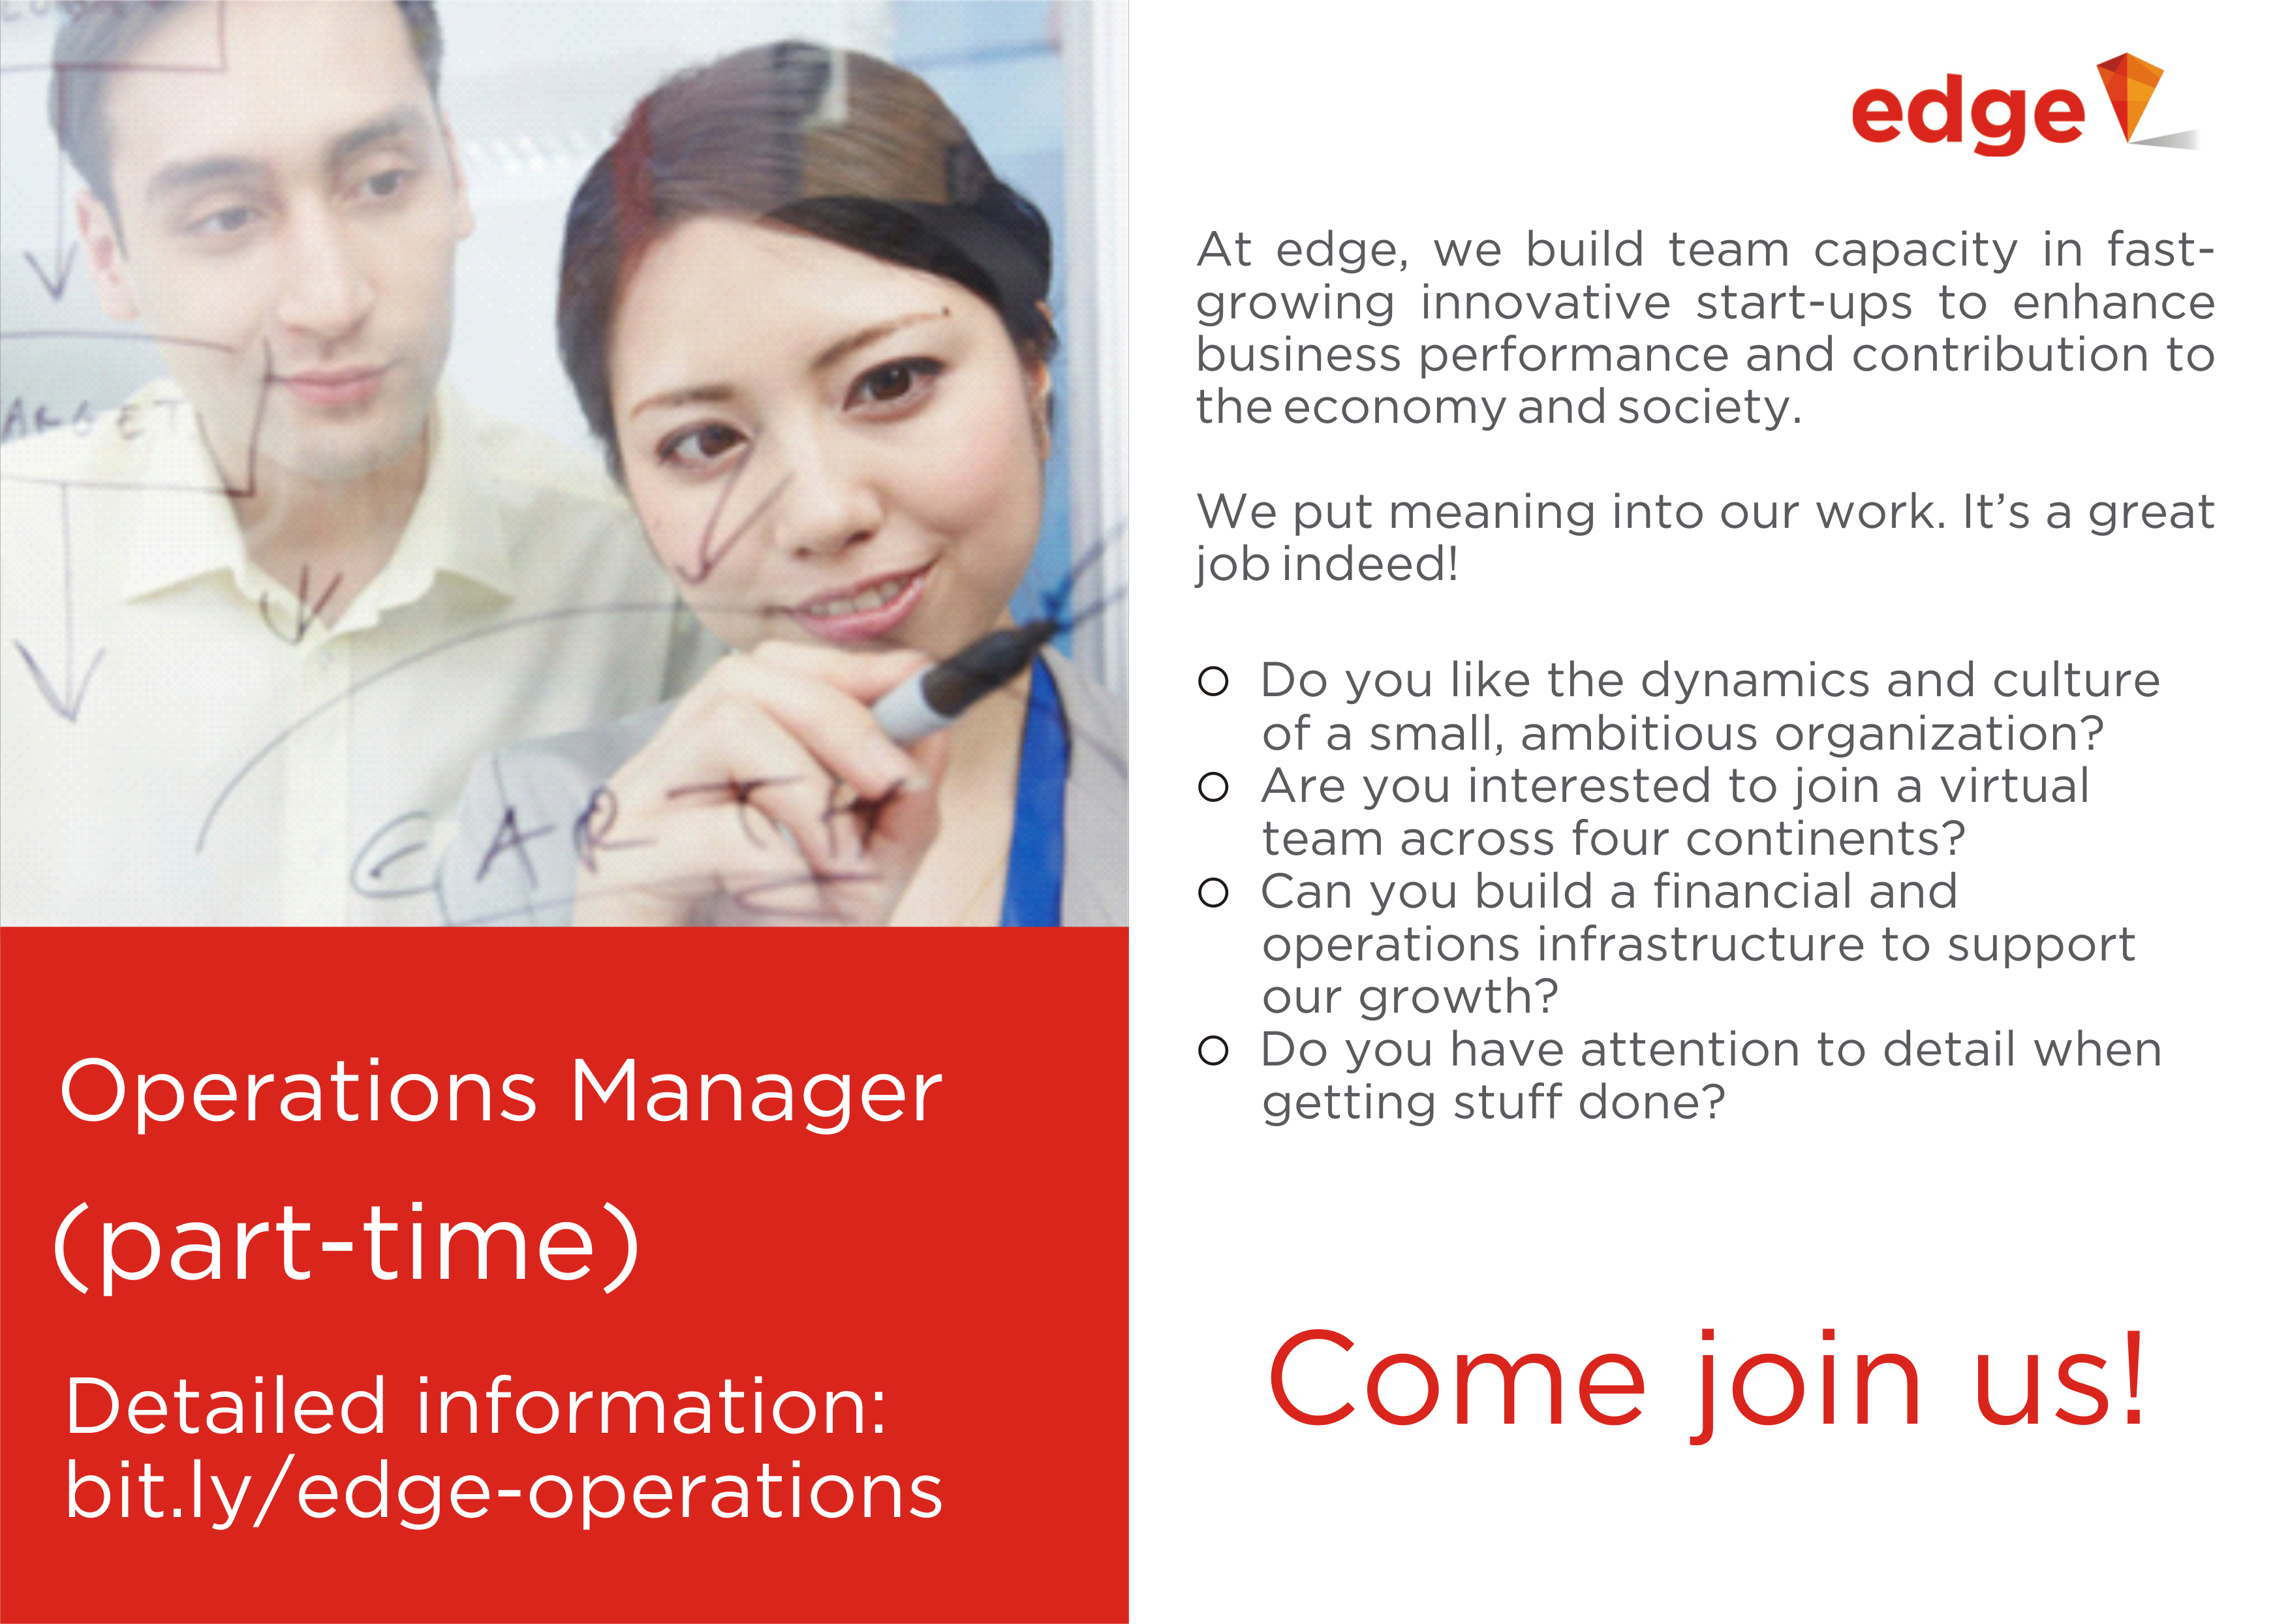 Looking for Operations Manager to join us at edge! 2014%2005%20Operation%20Manager%20V3